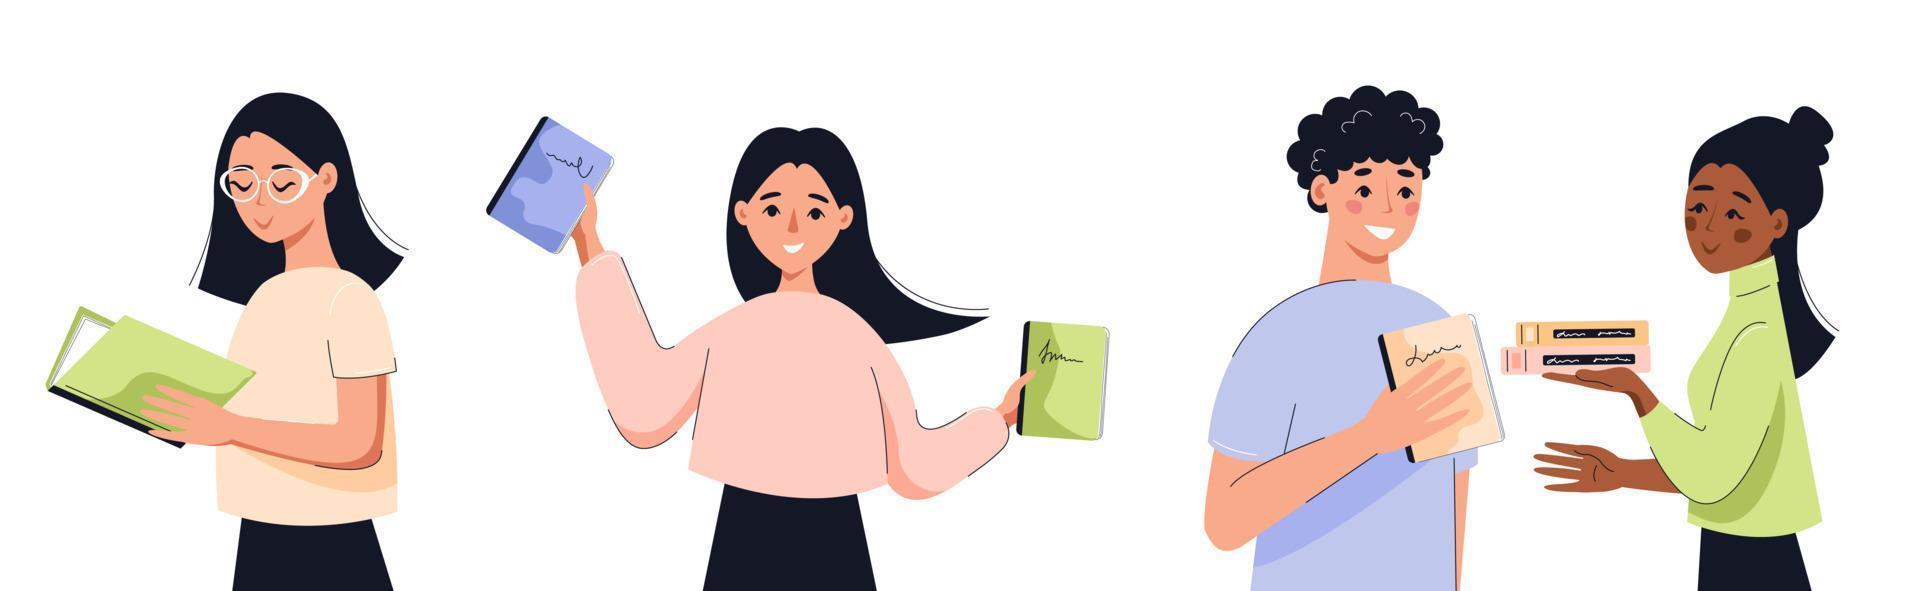 Happy smiling people holding books. Concept of books, education, reading, development. Isolated vector illustration.